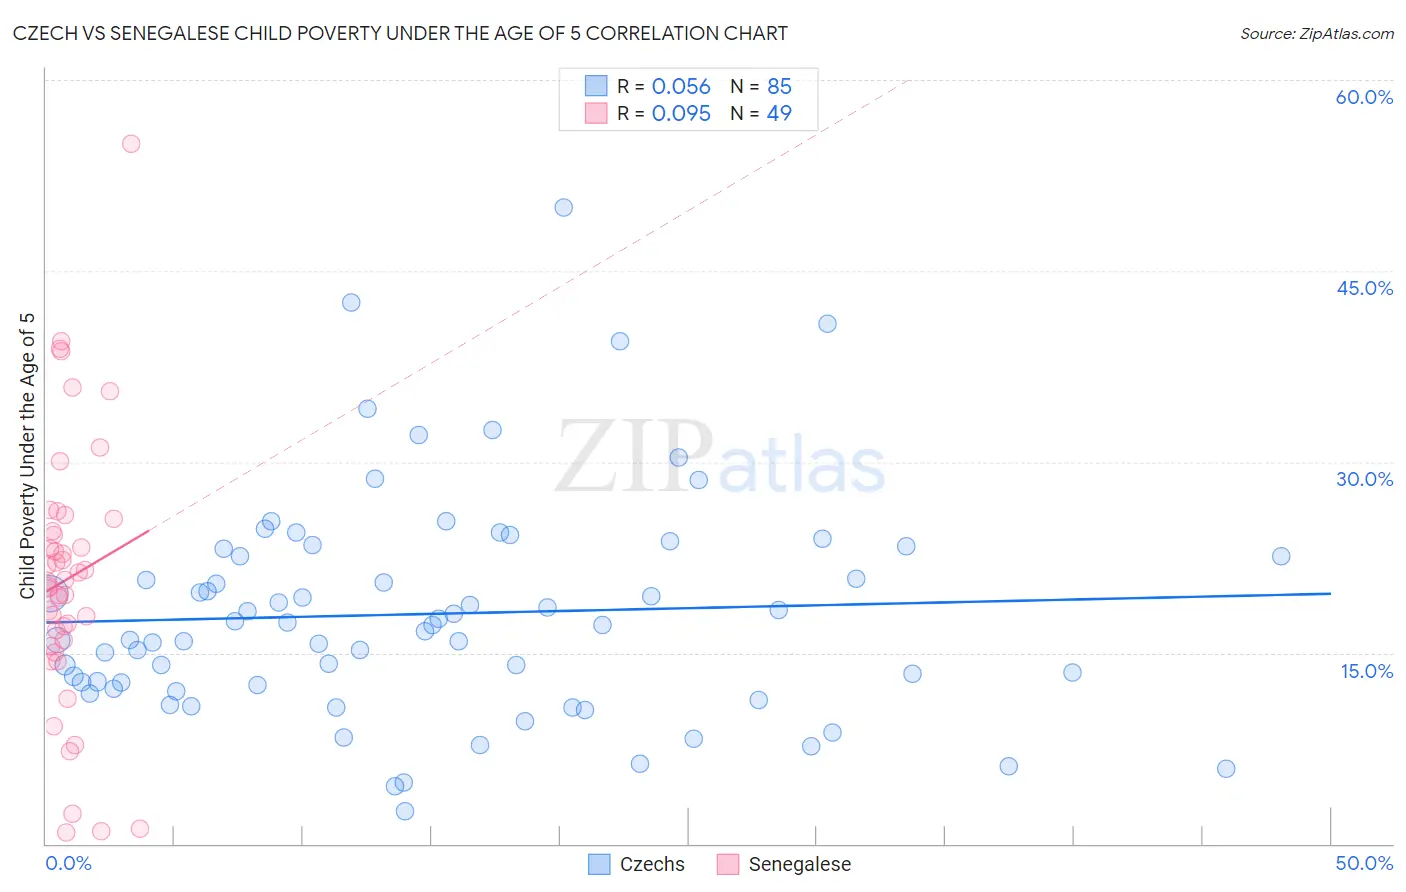 Czech vs Senegalese Child Poverty Under the Age of 5